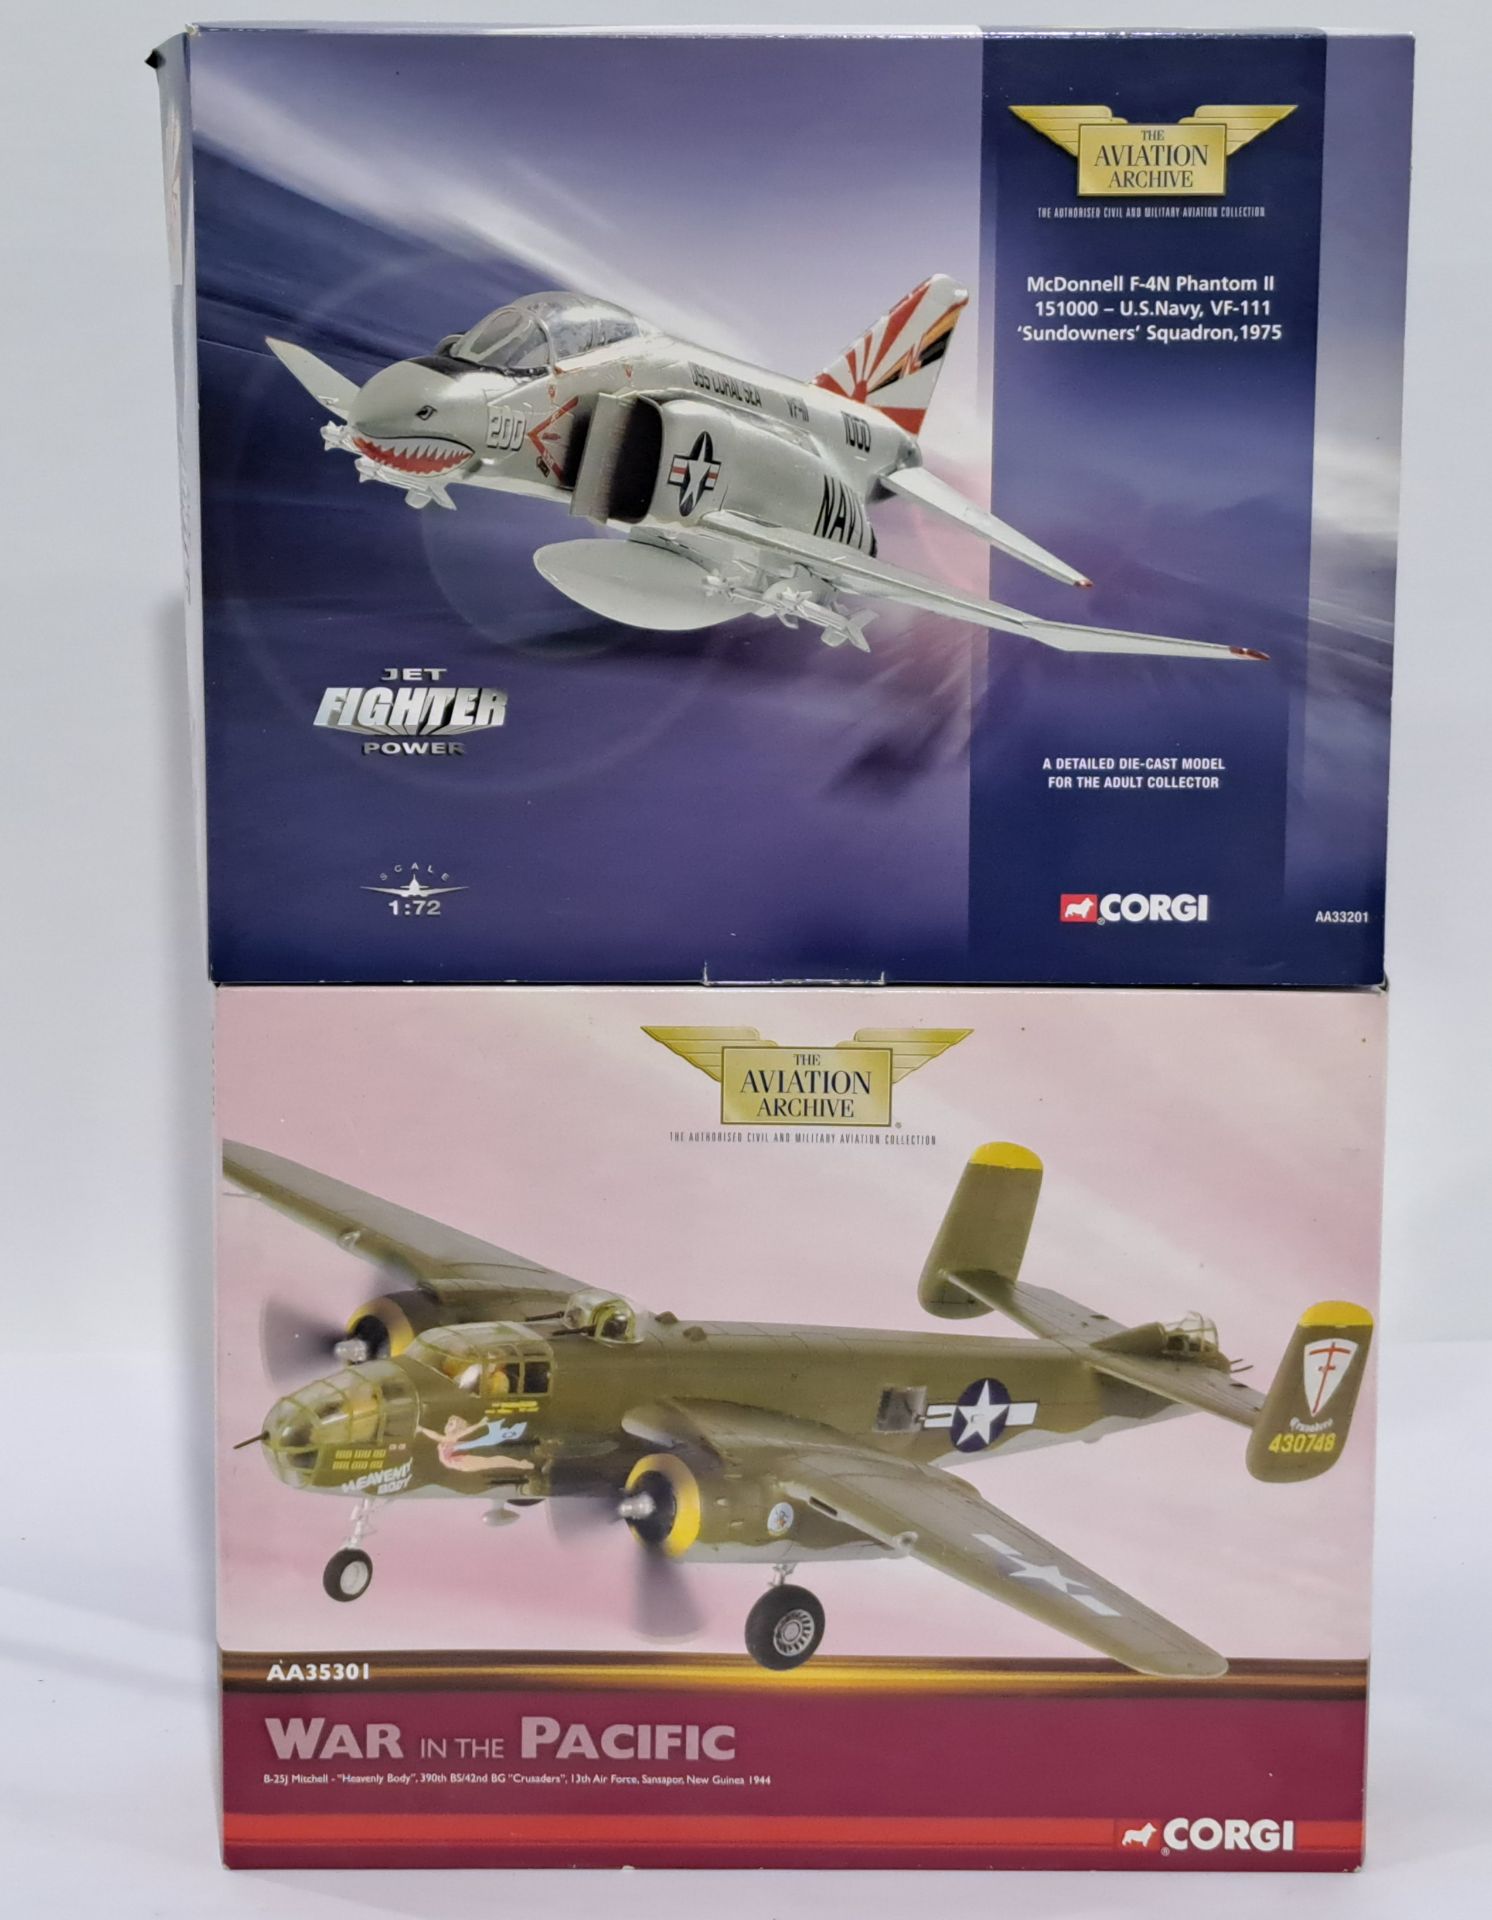 Corgi Aviation Archive a boxed group of War in the Pacific & Jet Fighter Power, 1/72 scale airpla...